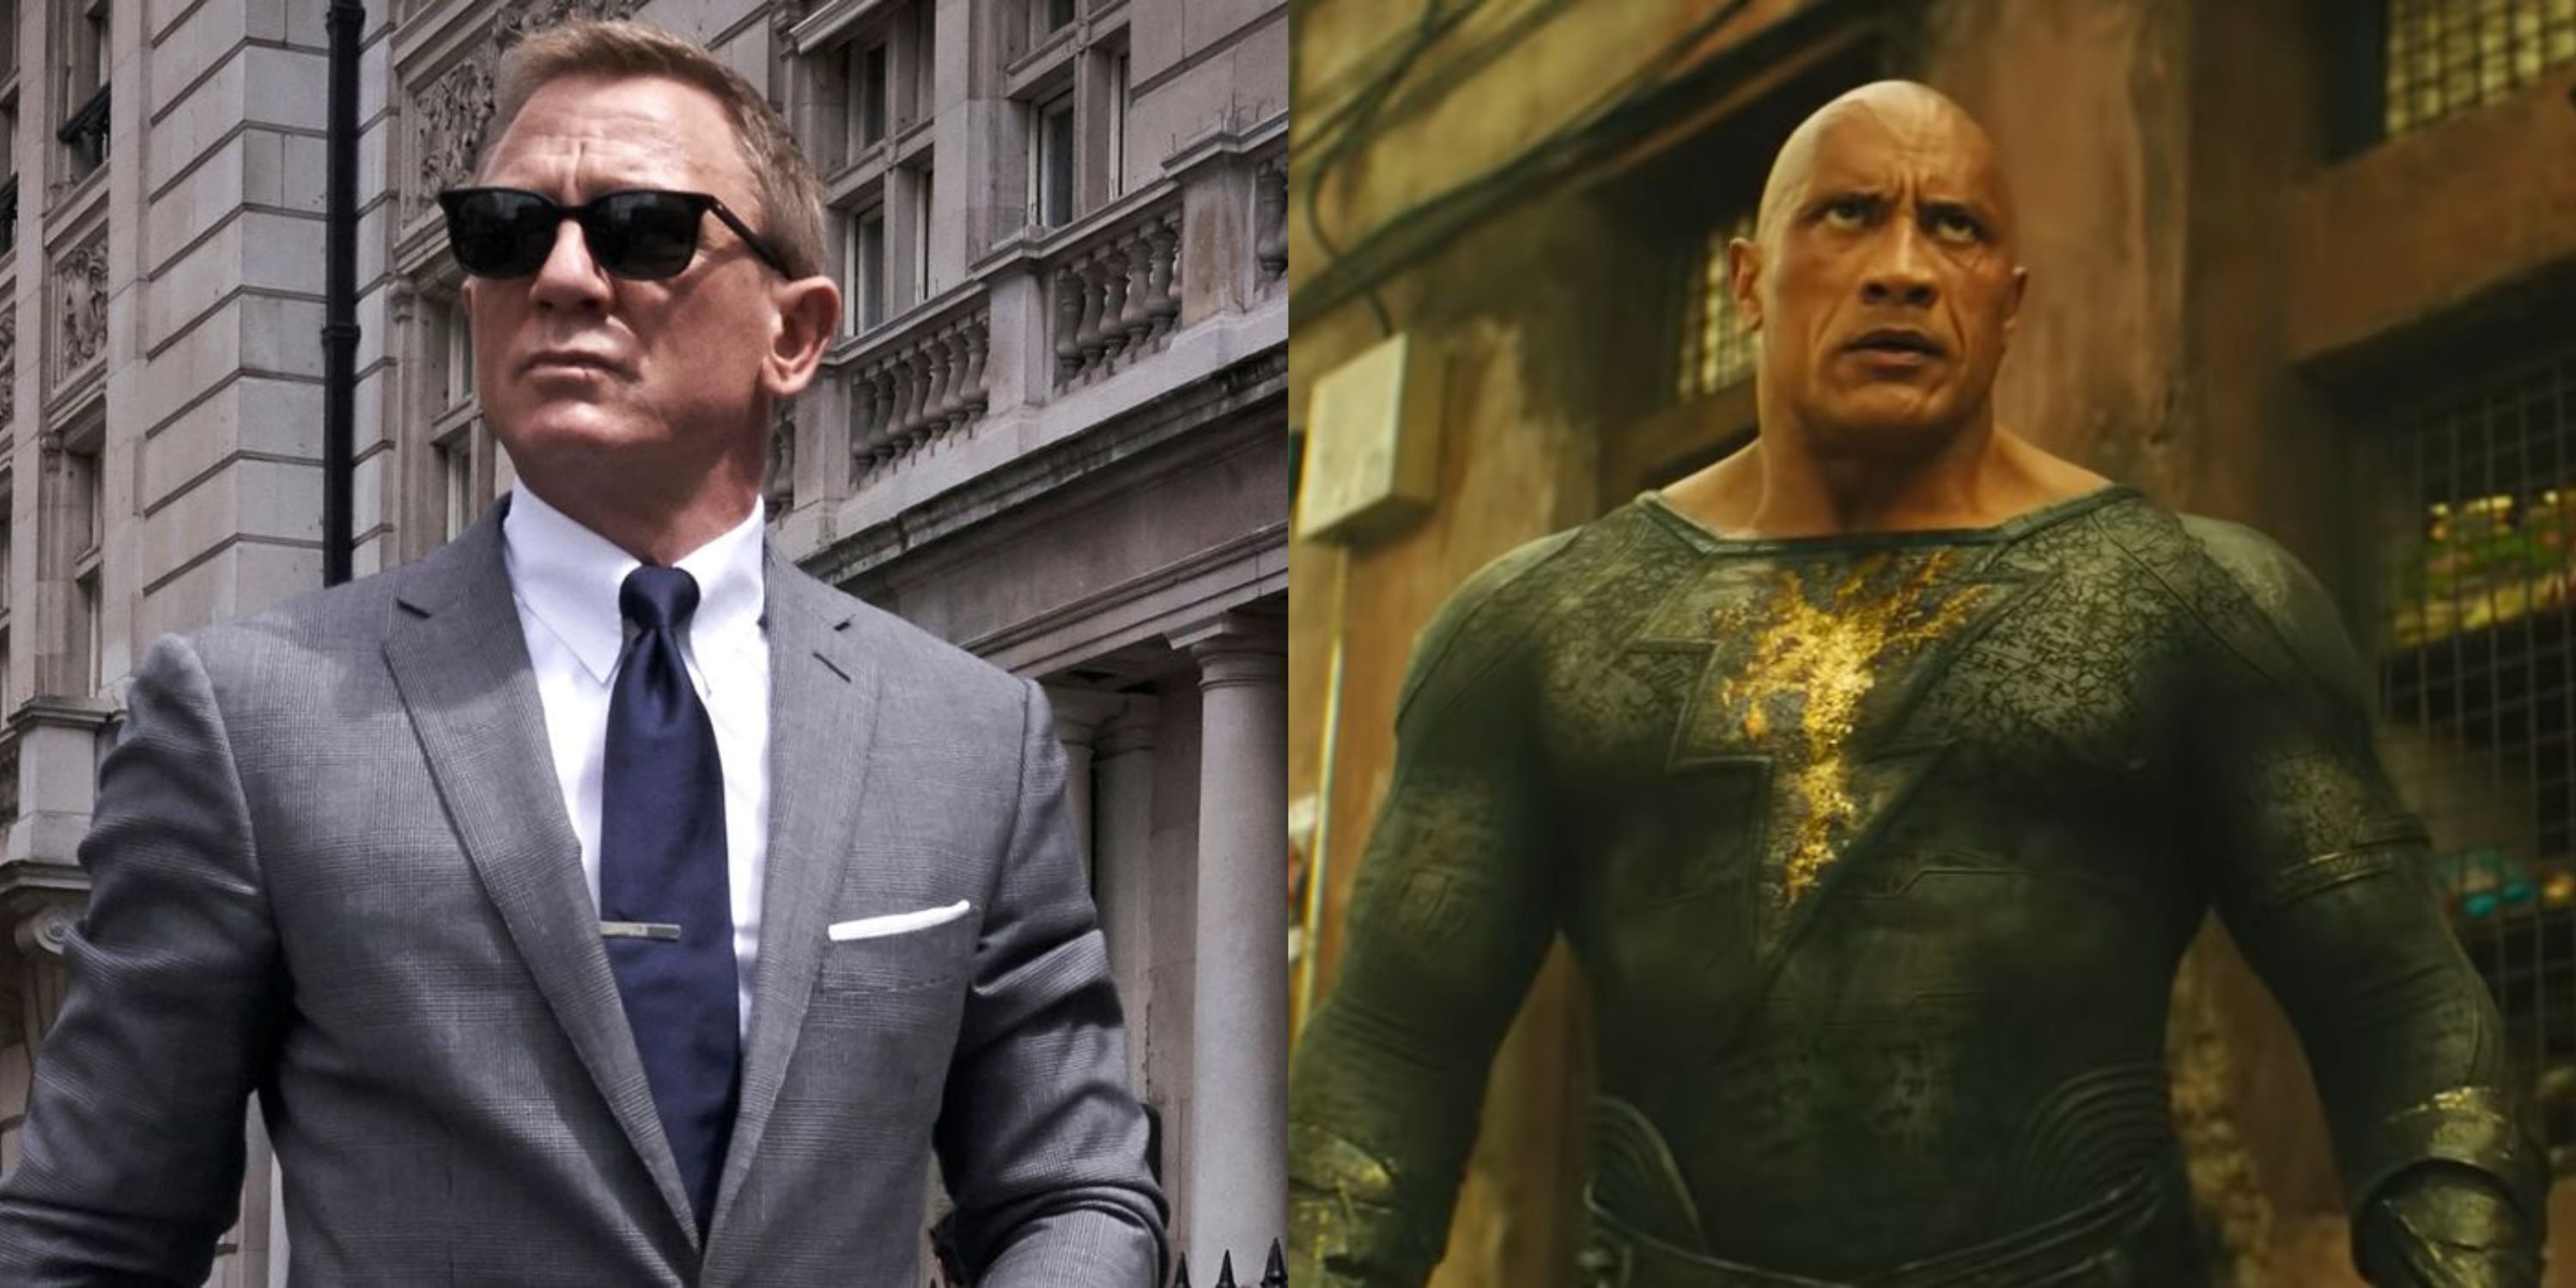 Featured image split Daniel Craig as 007 in No Time To Die and Dwayne Johnson as Black Adam